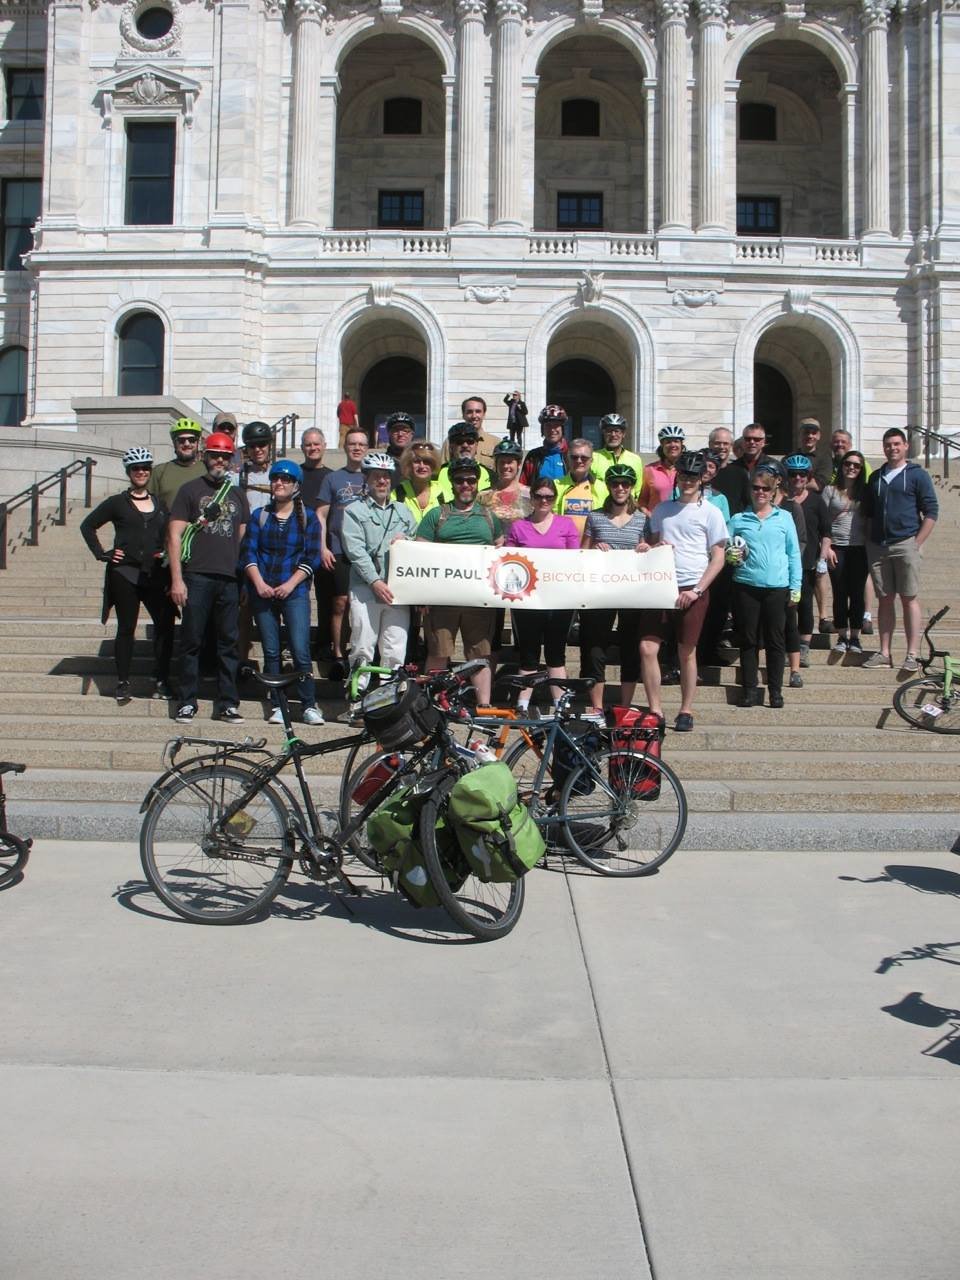 St. Paul Bicycle Coalition advocates for safer biking options and connections